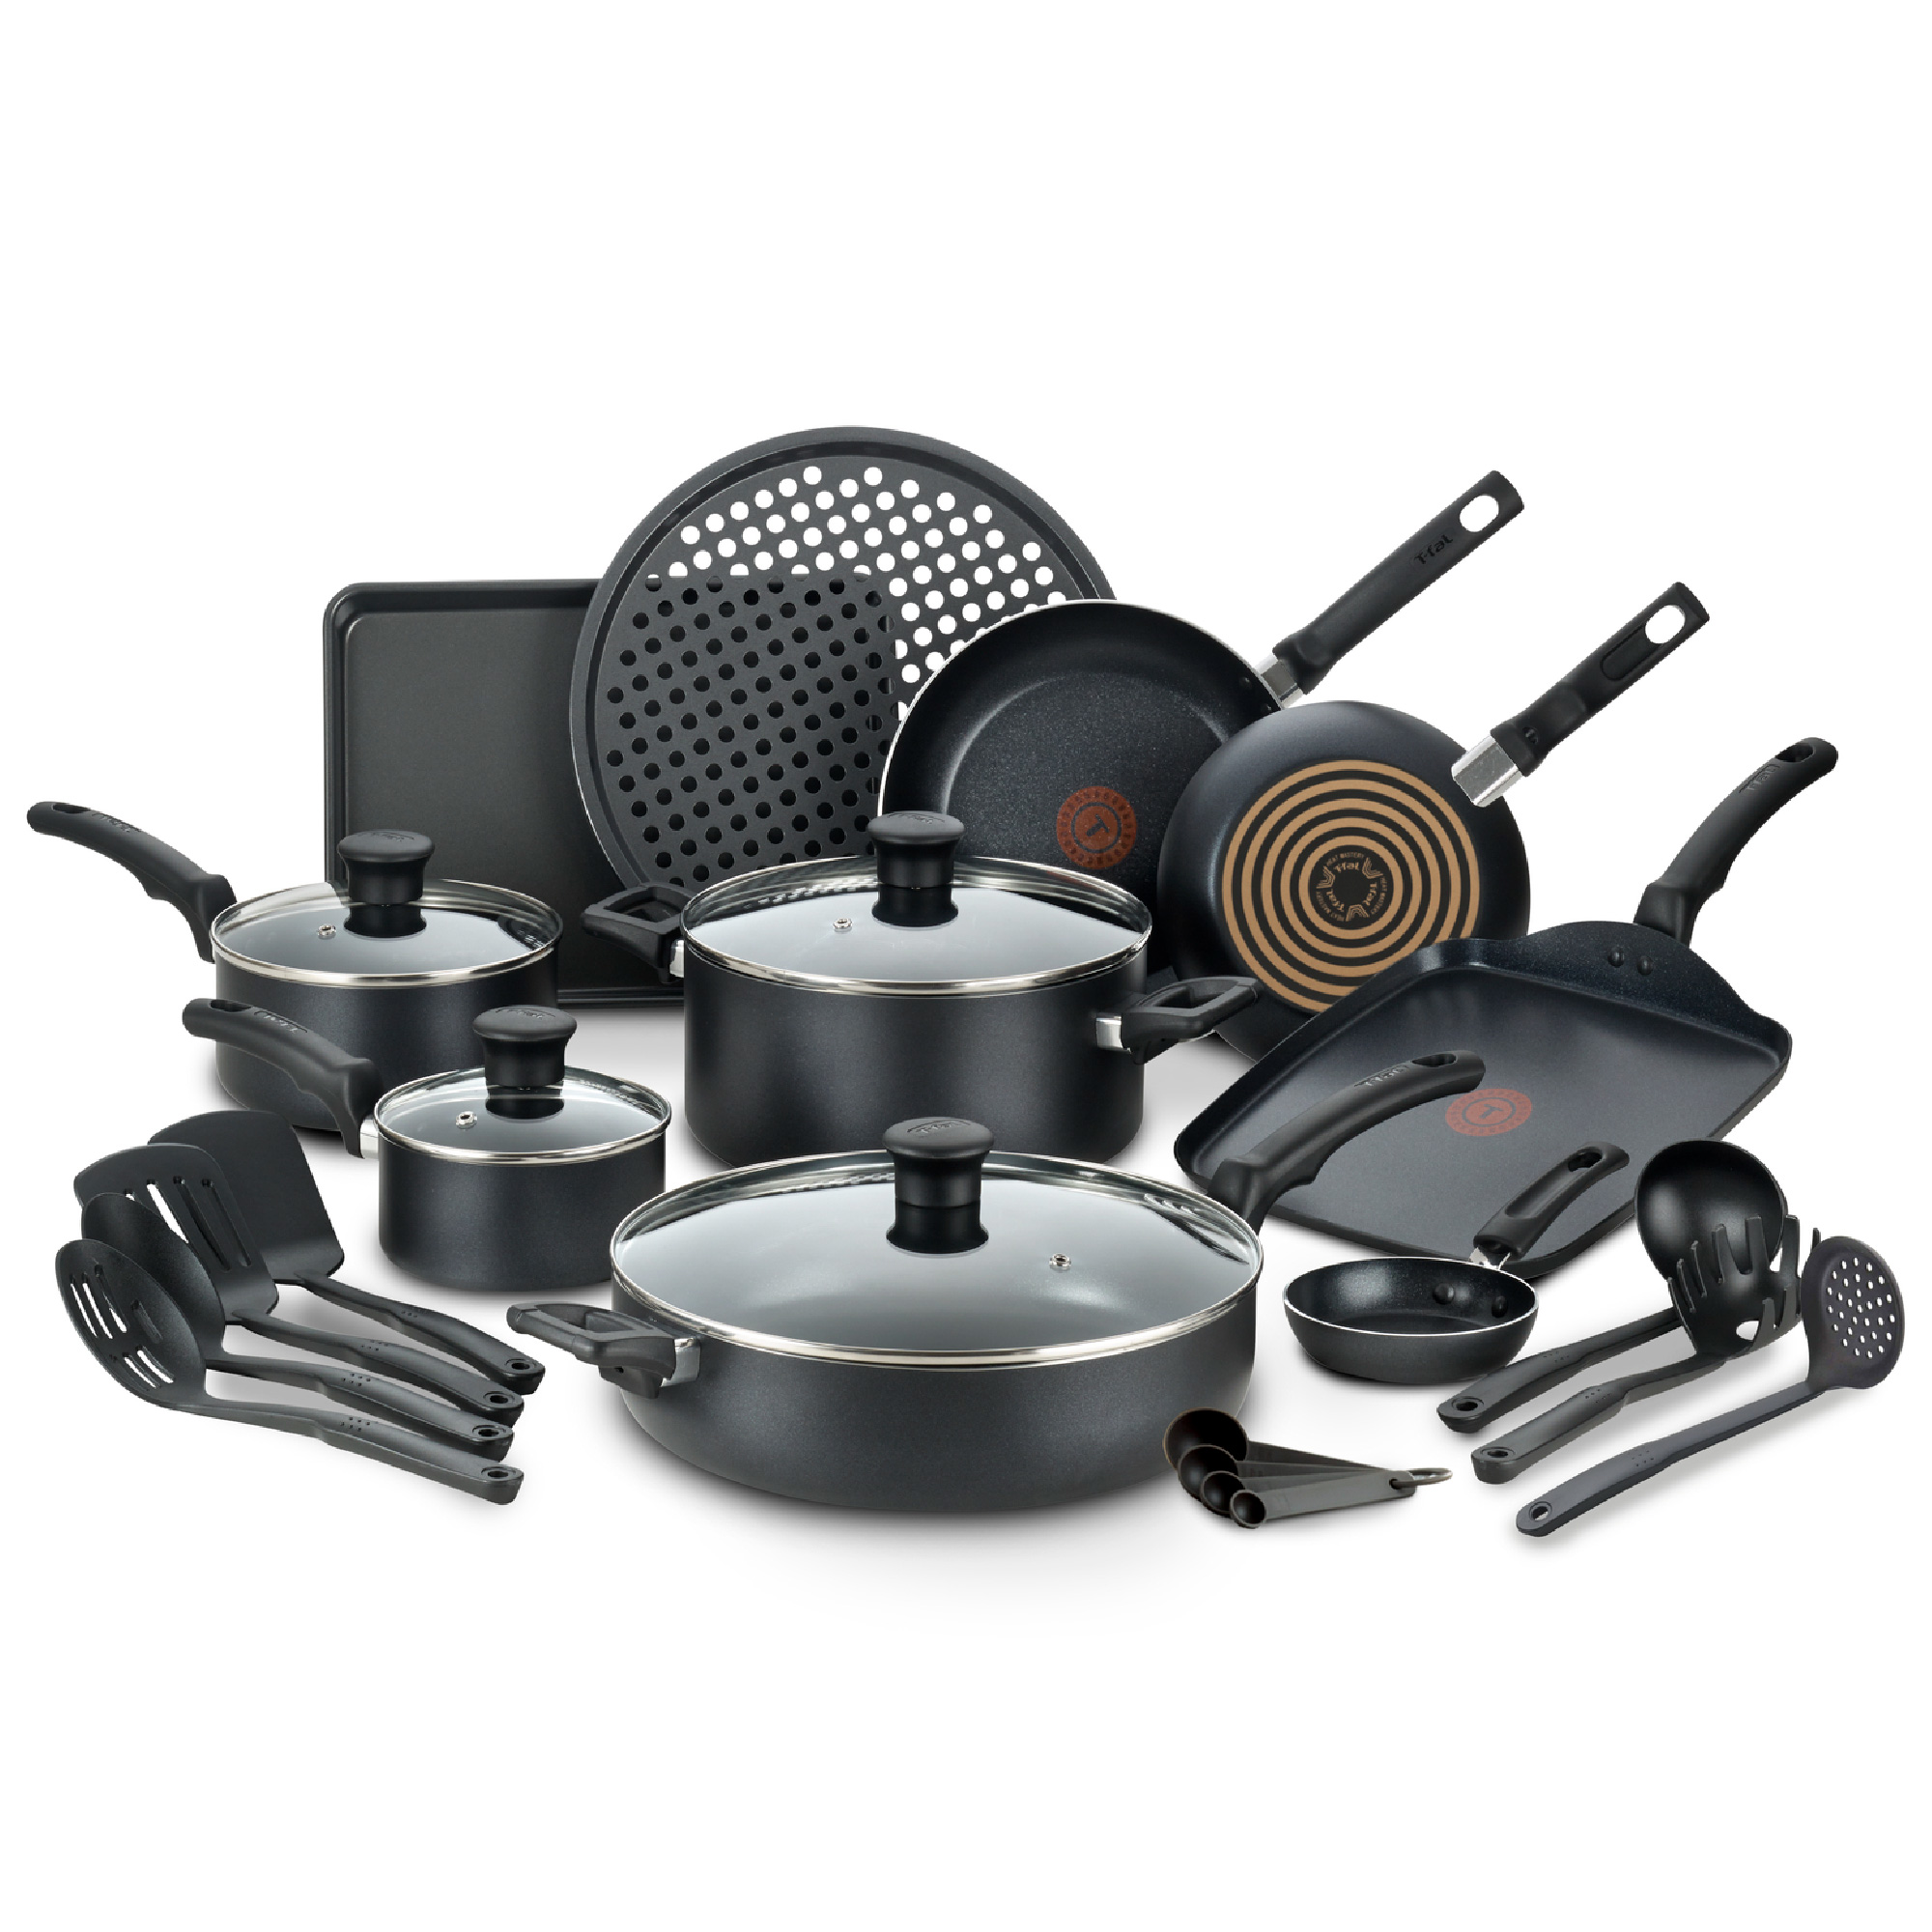 T-fal Kitchen Solutions 22-Piece Nonstick Cookware Set, Thermospot, Black - image 1 of 11